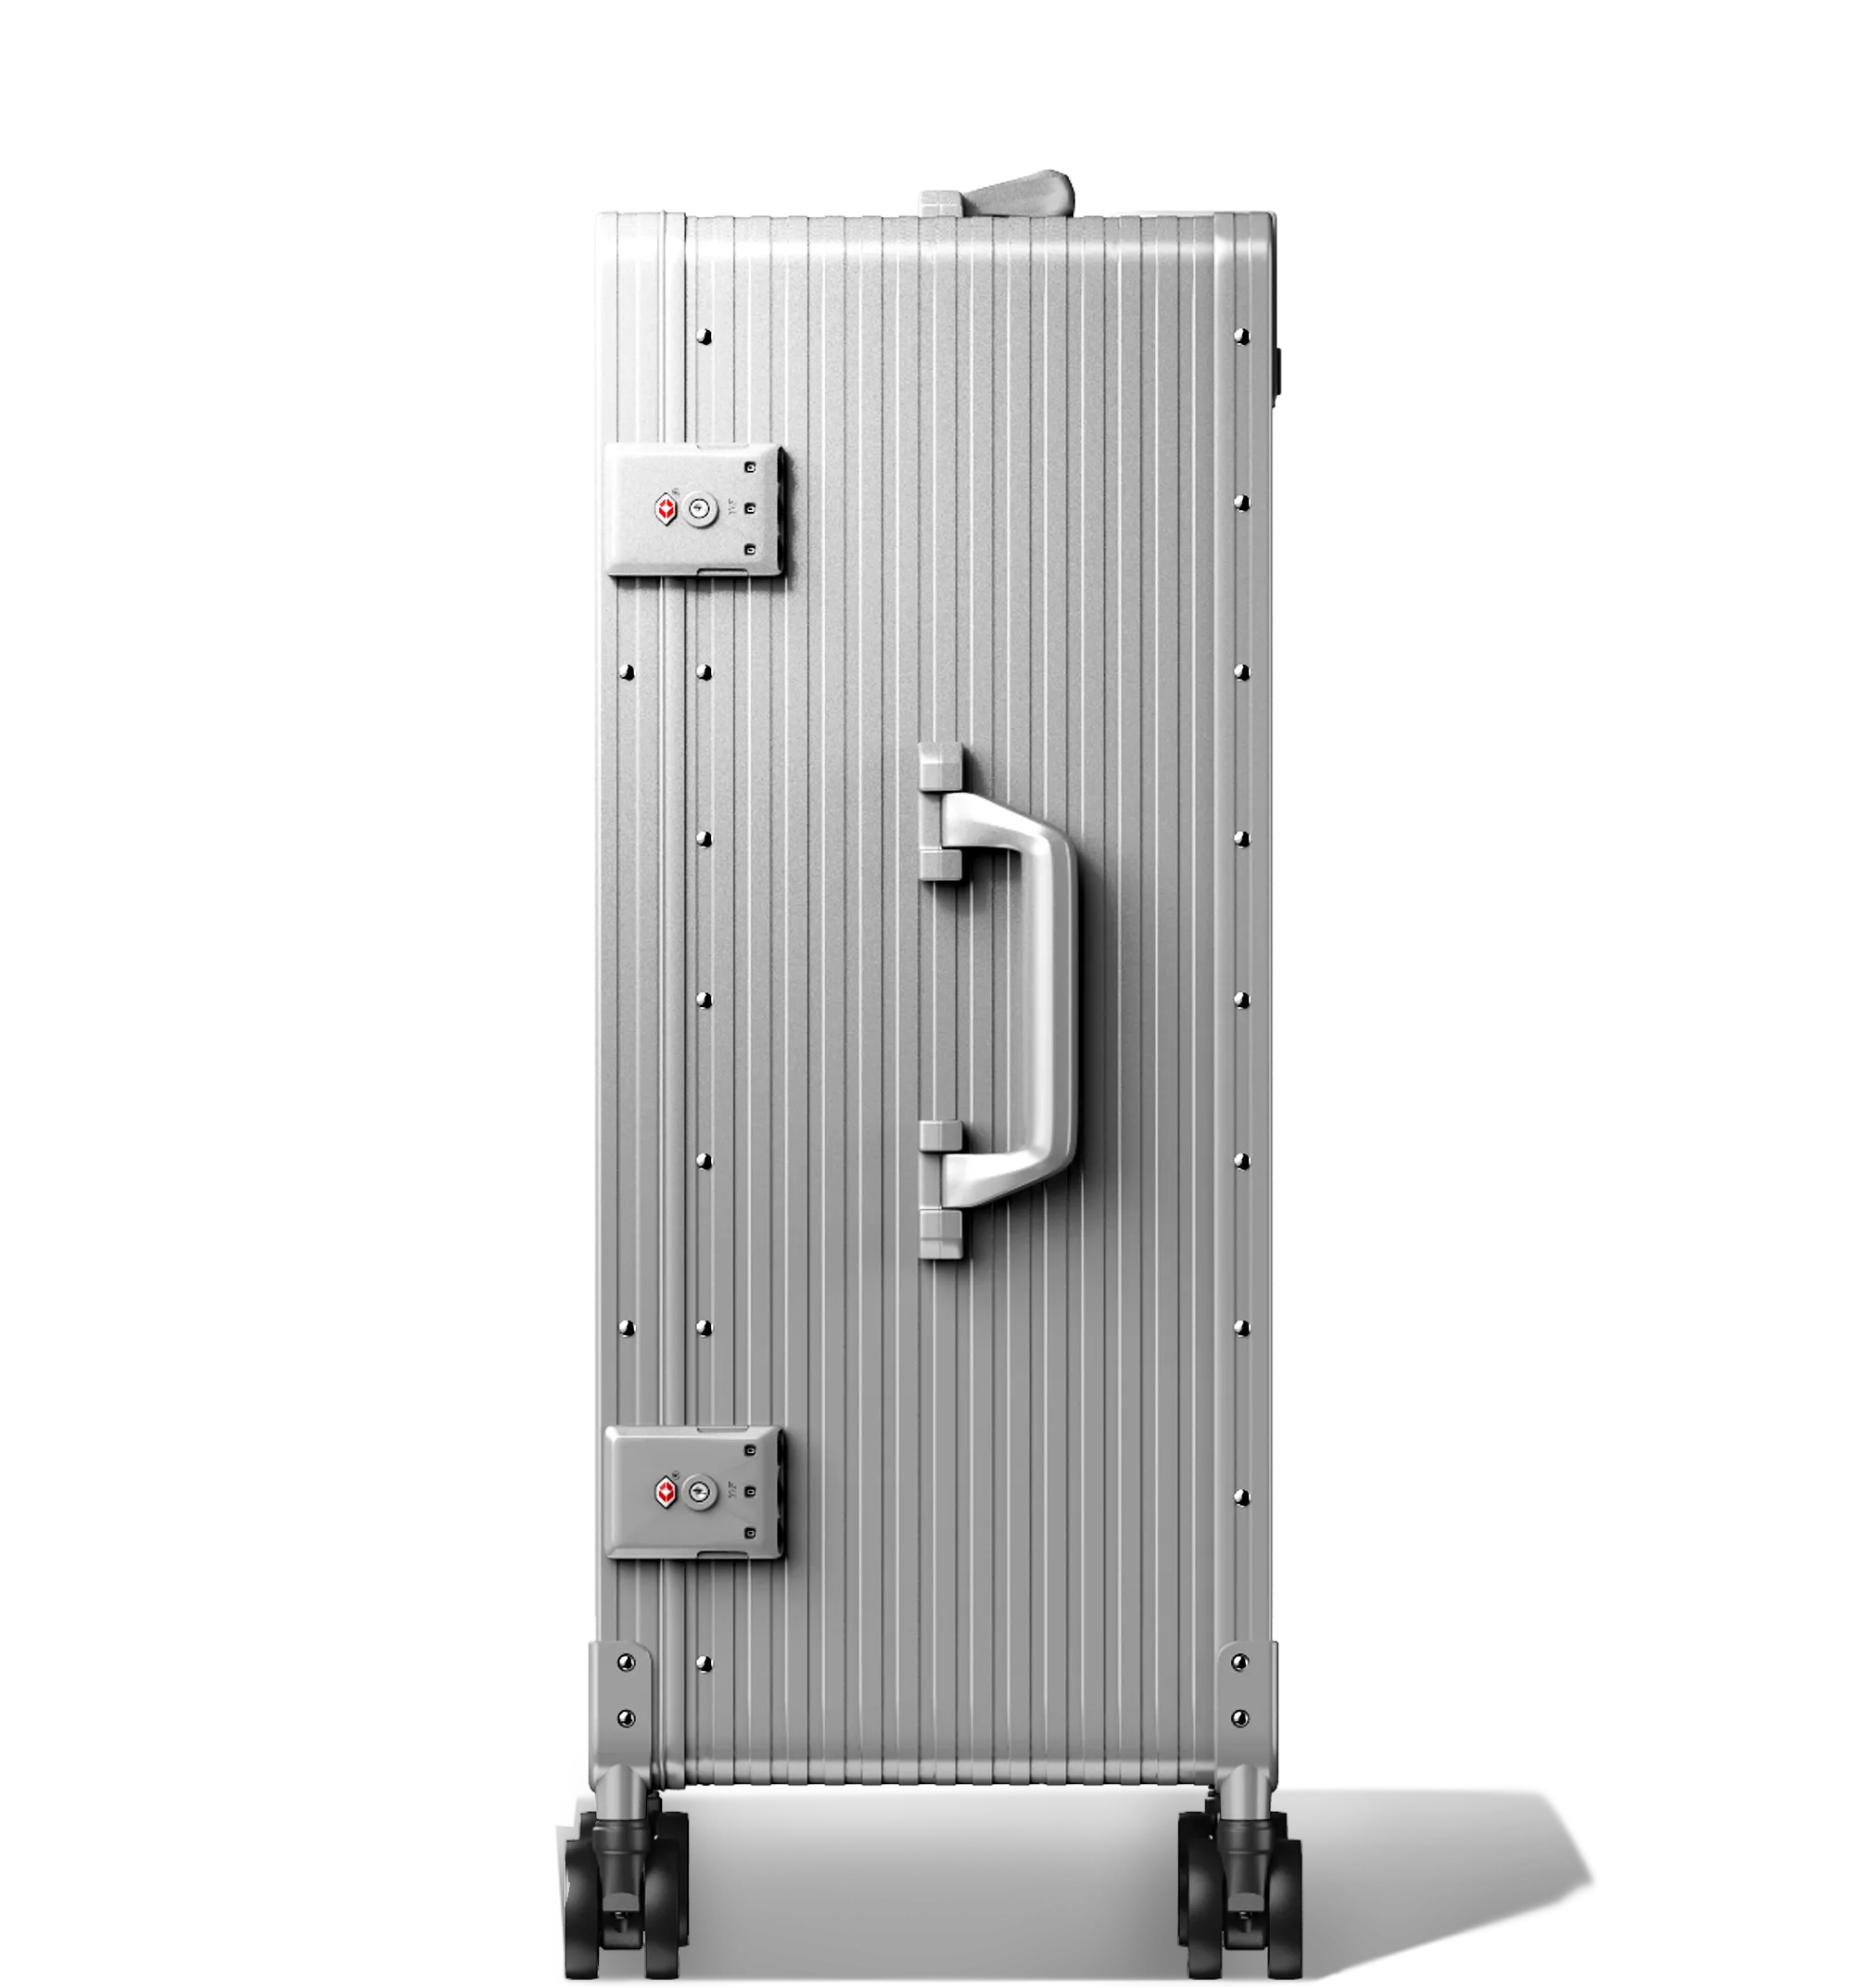 A Silver Check-In 65/25 hard-shell aluminium Luggage standing upright with ribbed texture, side and top carry handles, two TSA-approved combination locks, and four spinning wheels, against a white background.